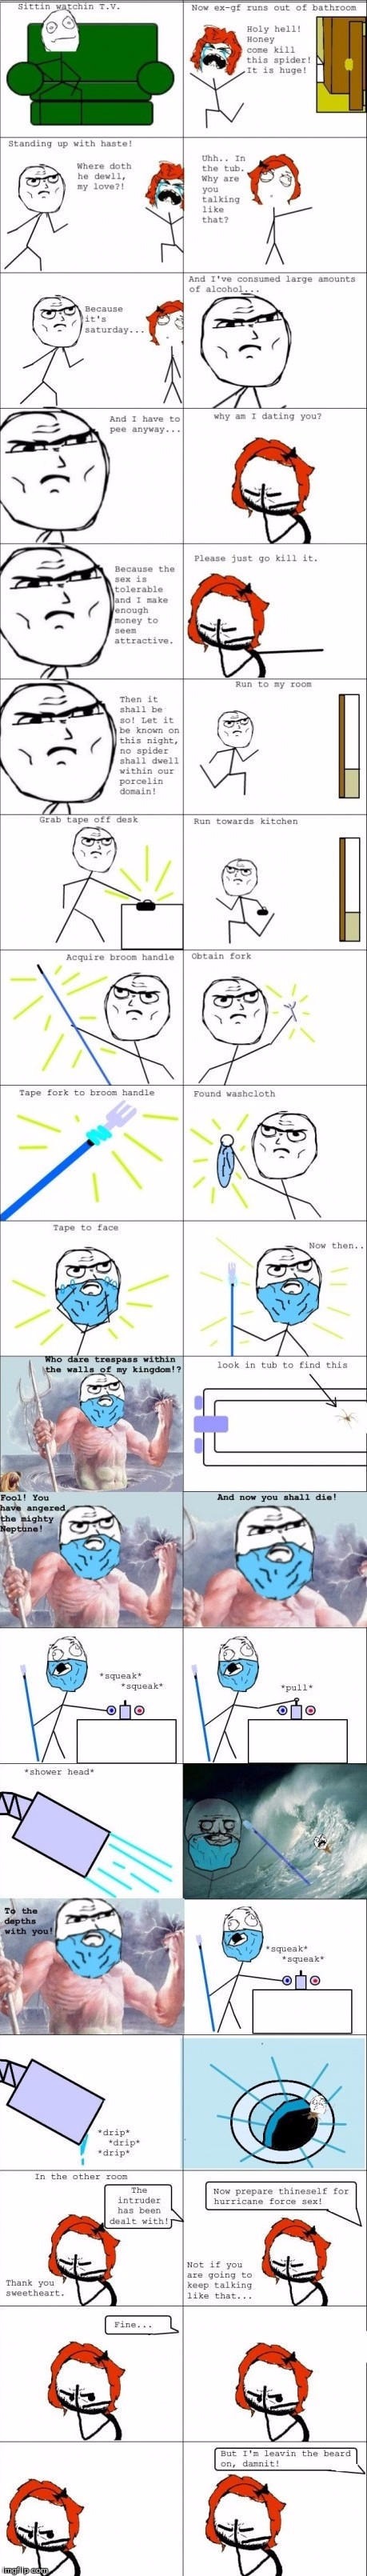 image tagged in rage comics,spider,poseidon | made w/ Imgflip meme maker